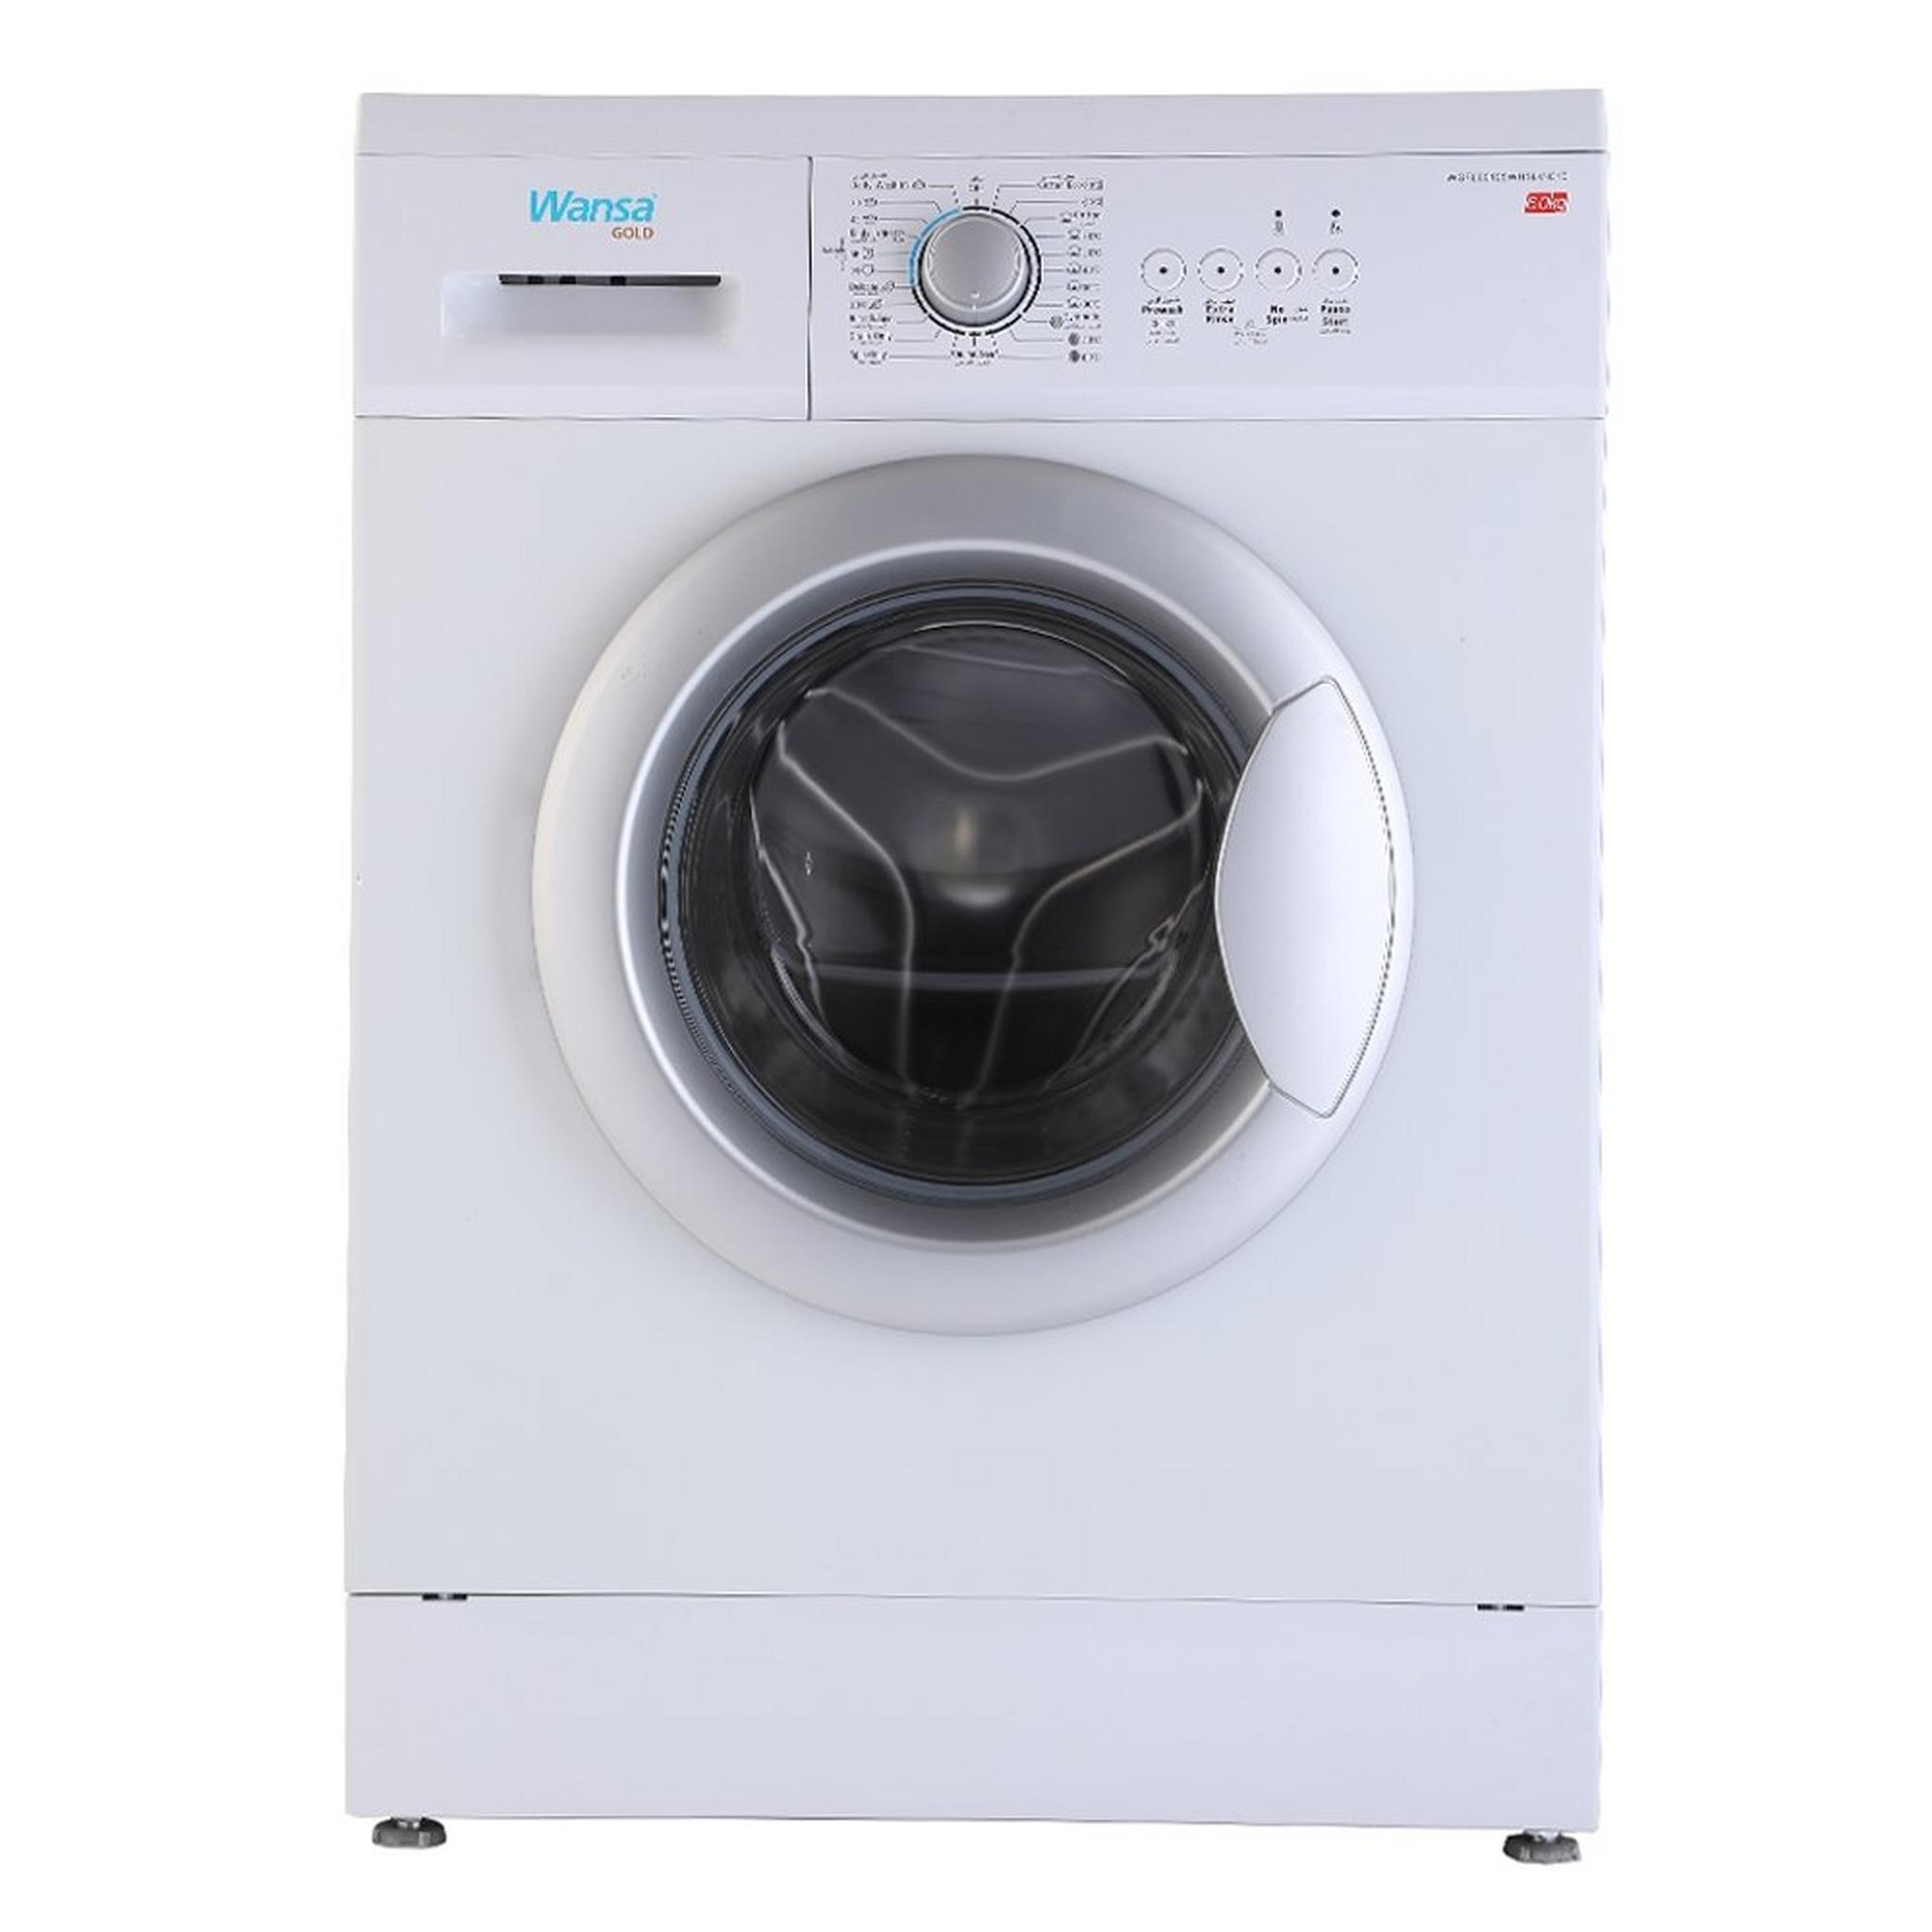 Wansa Gold 6KG Front Load Washer - White (WGFL60105WHSLV-C10)